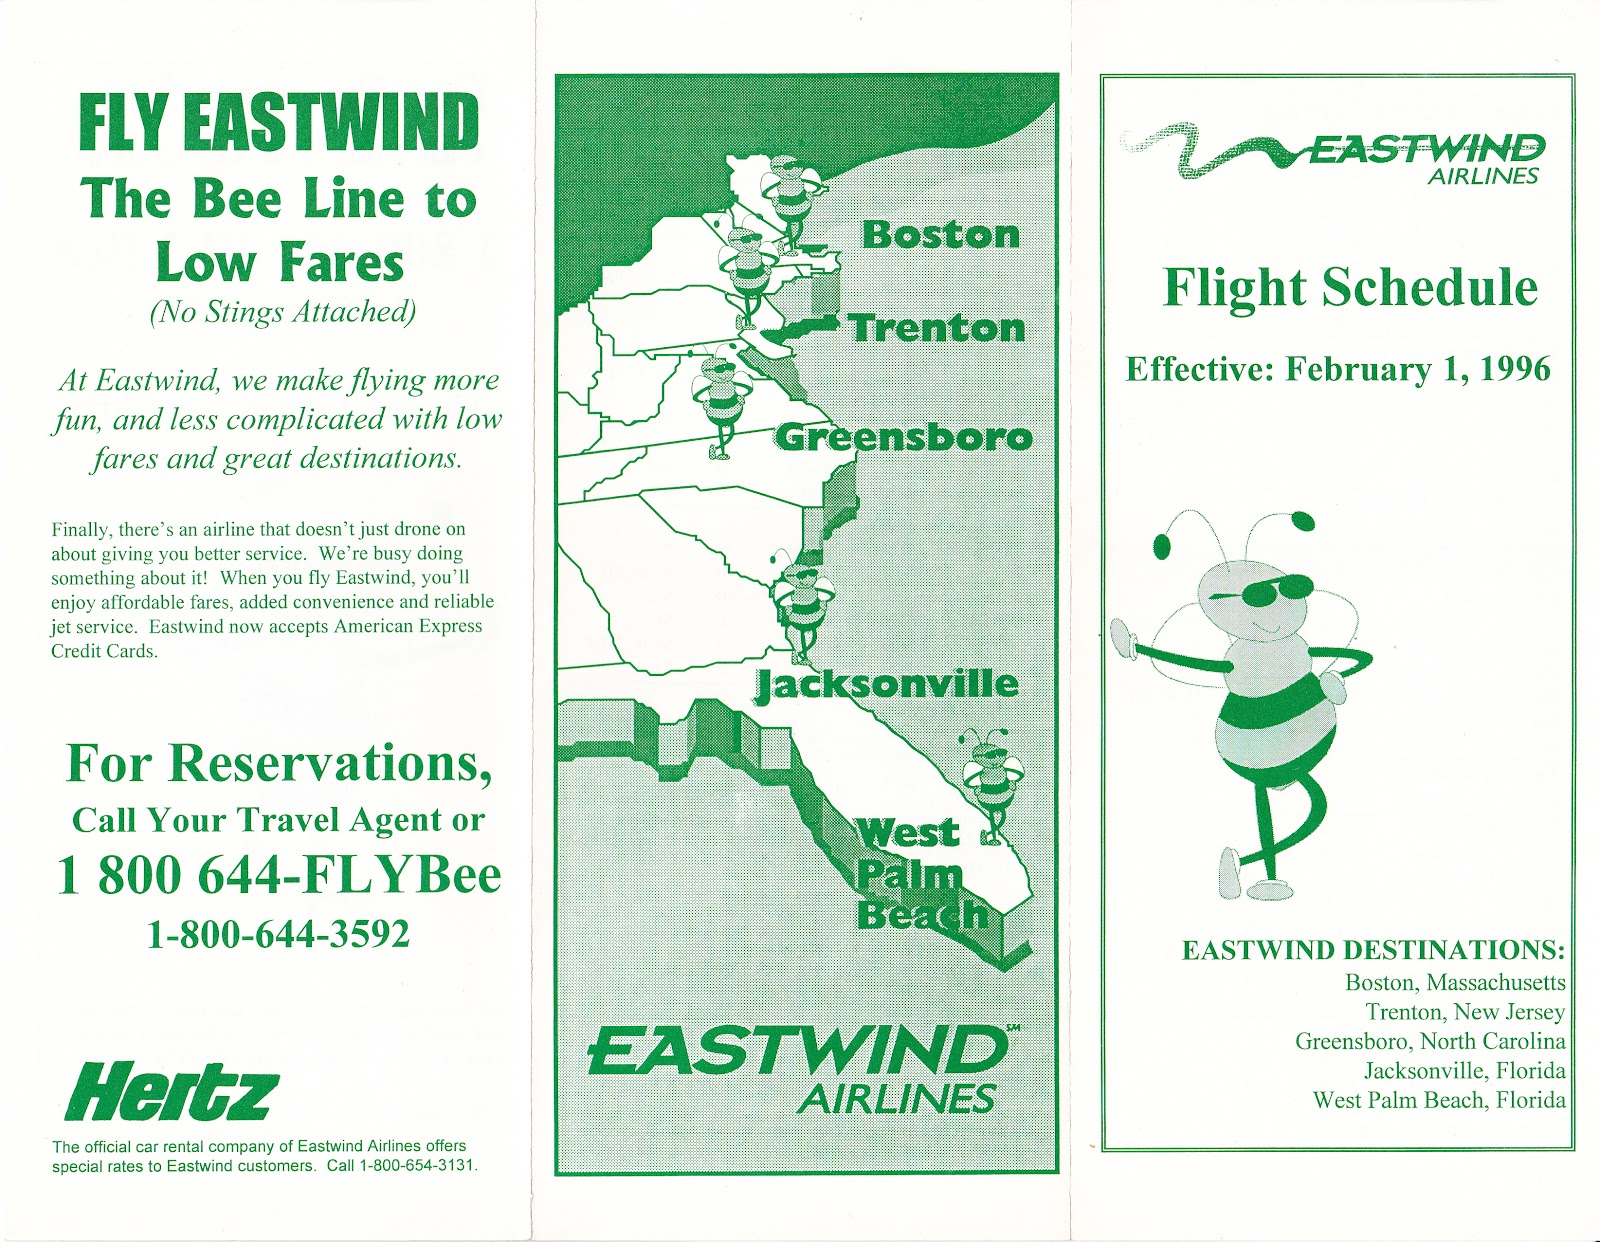 Buy 4 0123 save 50% Eastwind Airlines system timetable 8/29/96 